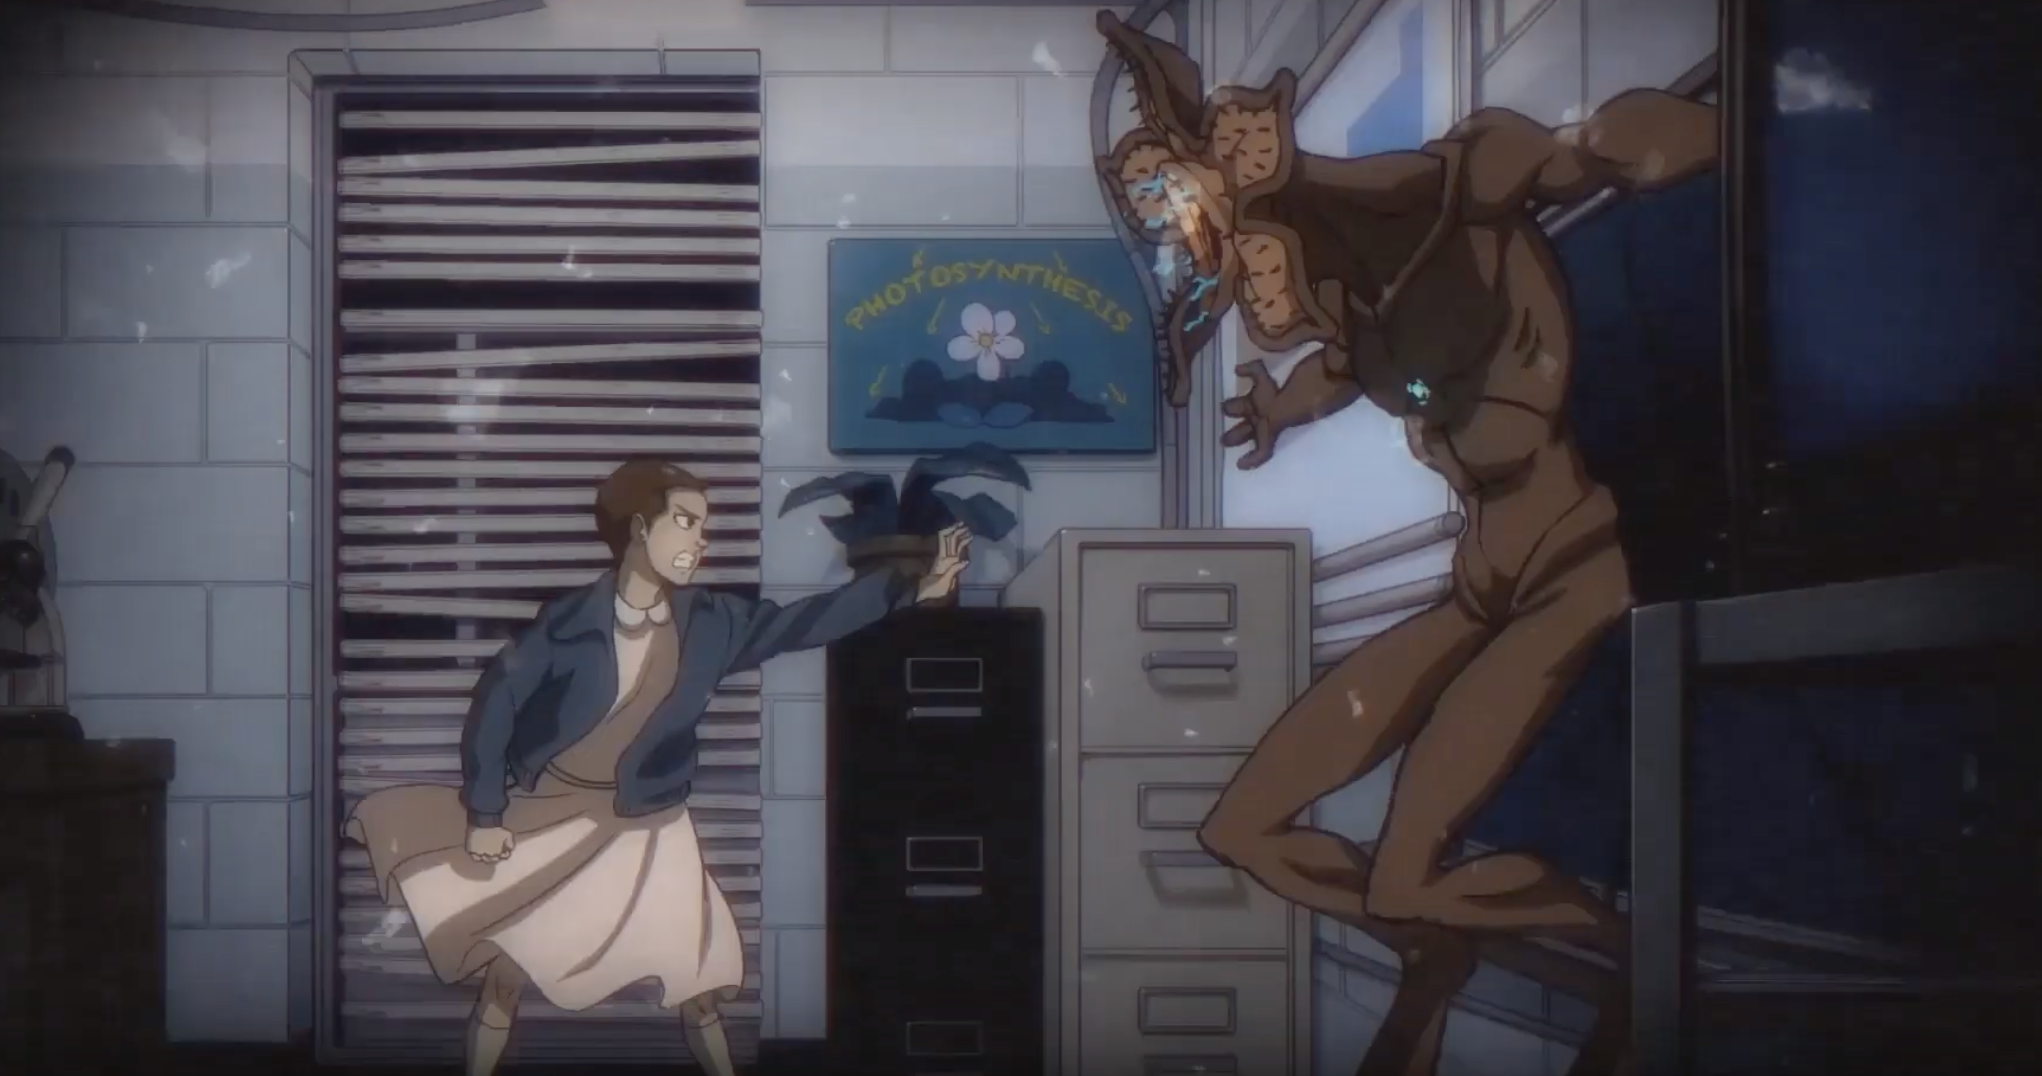 Stranger Things Gets Turned Into ’80s Anime In Fan Video